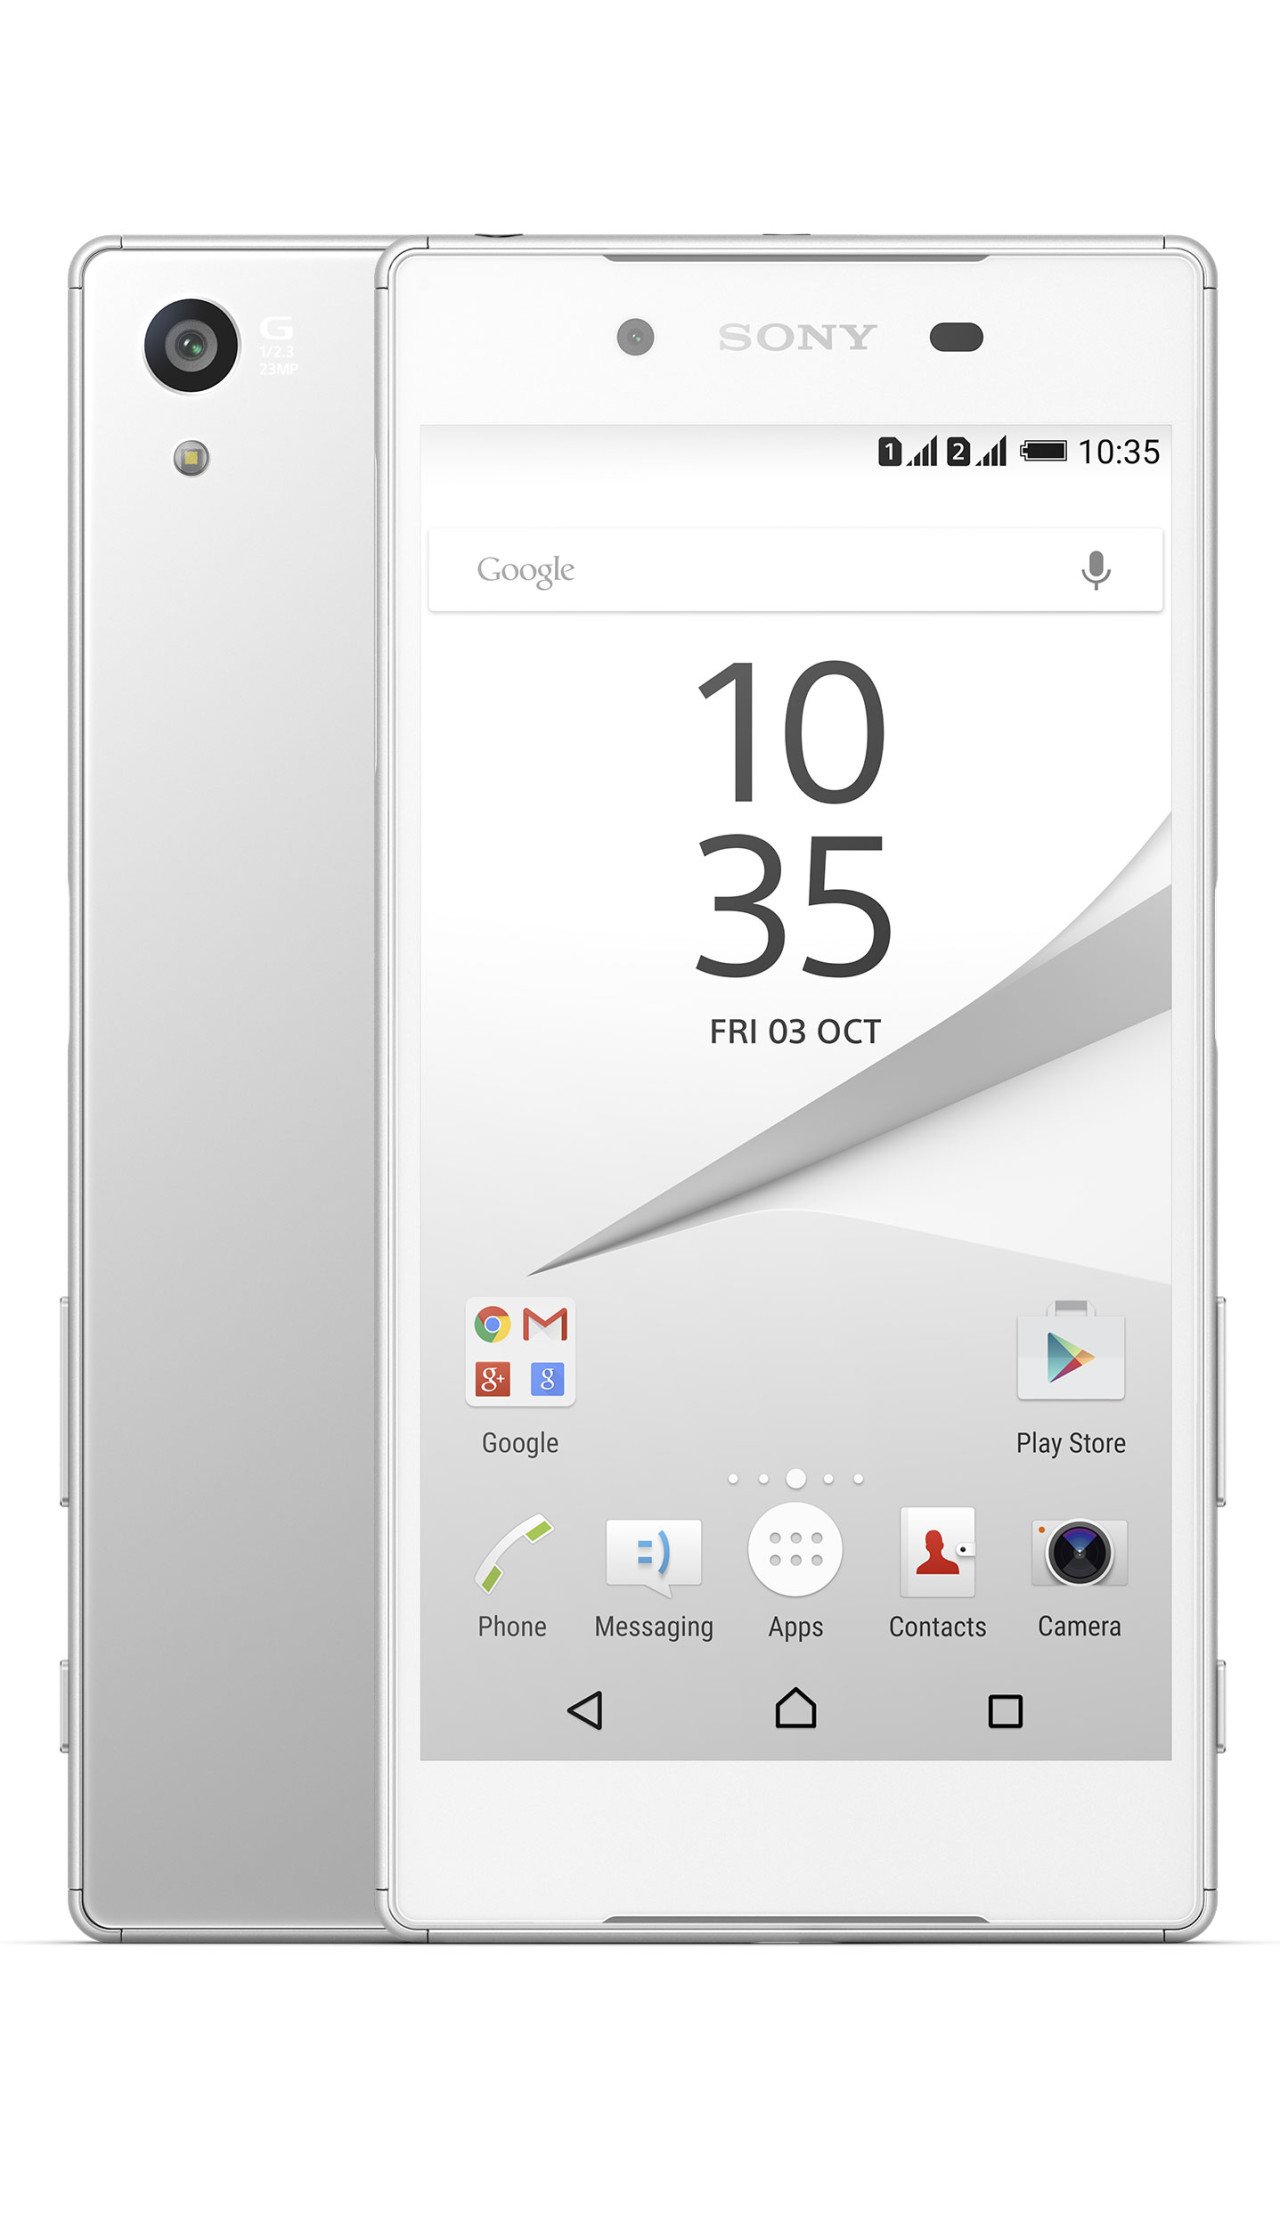 Sony Xperia Z5 Compact review, release date